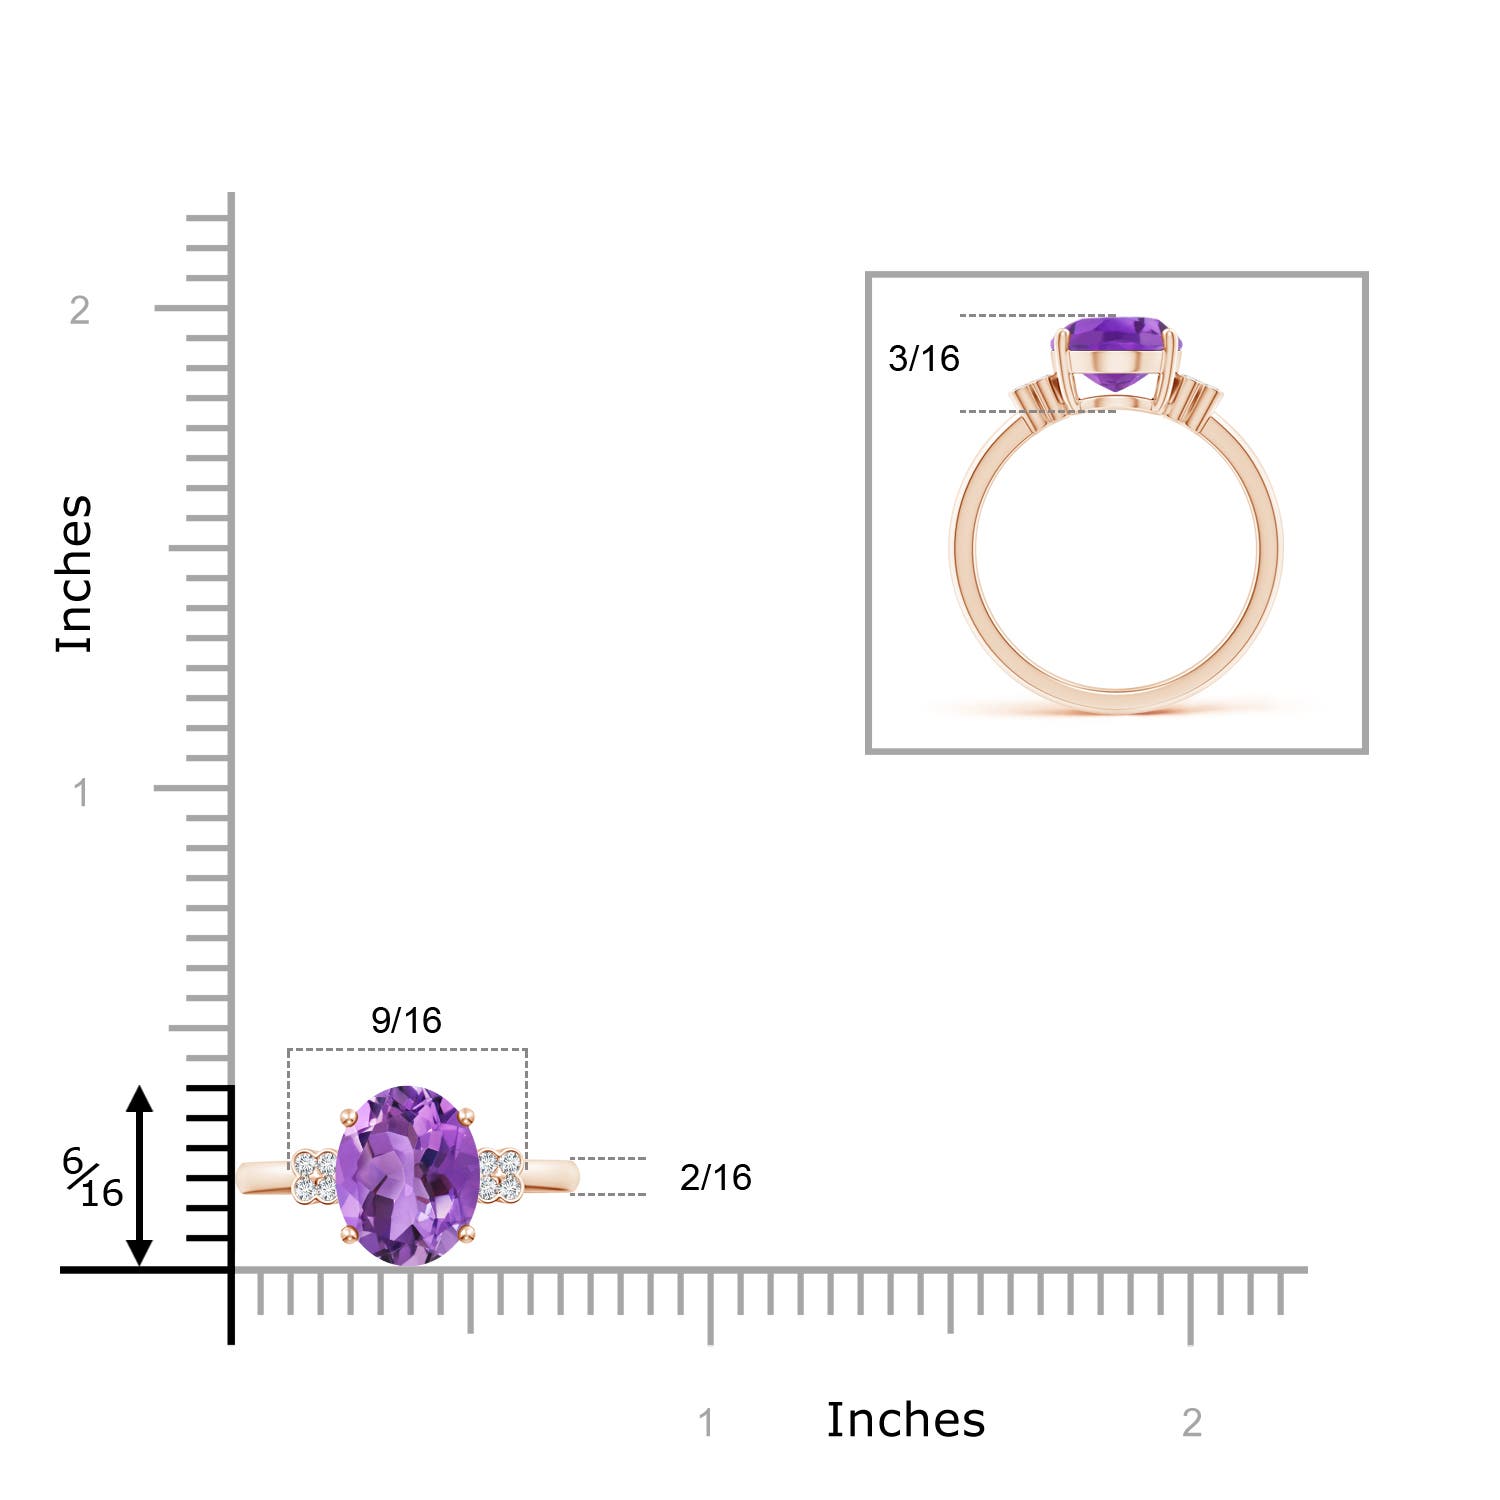 AA - Amethyst / 2.36 CT / 14 KT Rose Gold